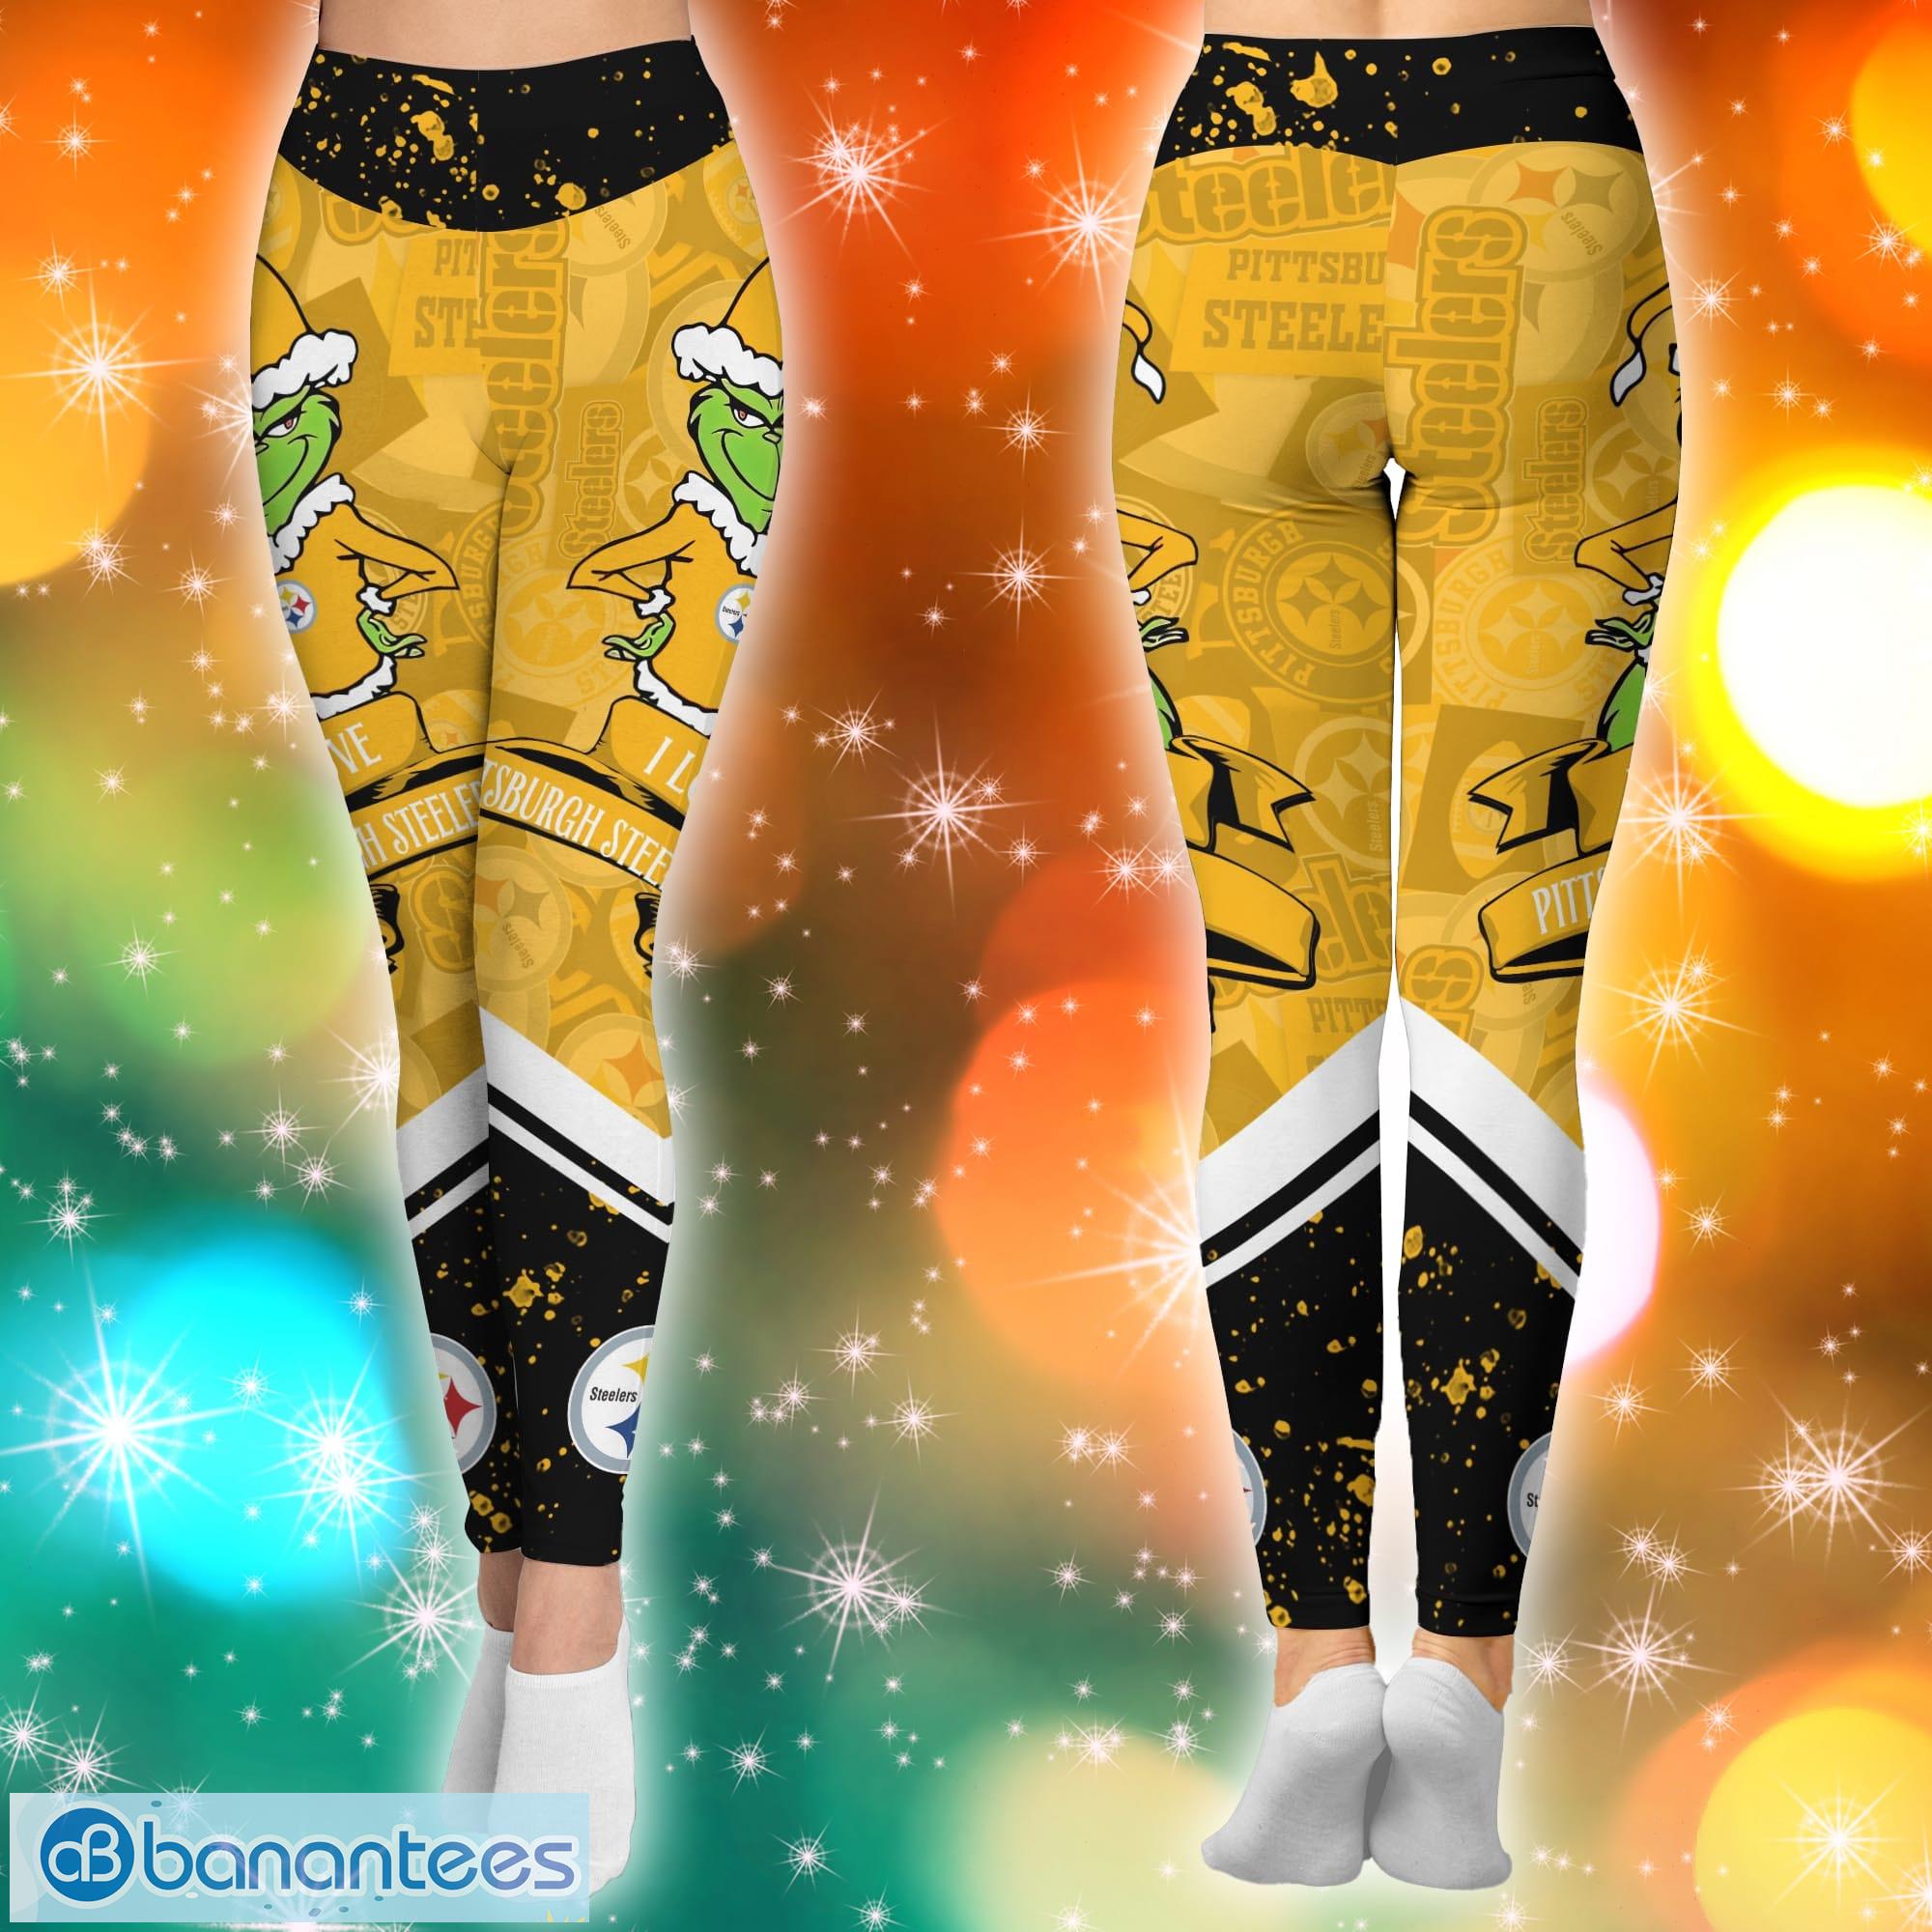 https://image.banantees.com/2023-09/i-love-pittsburgh-steelers-nfl-grinch-3d-hoodie-and-long-pants-set-gift-christmas-personalized-1.jpg